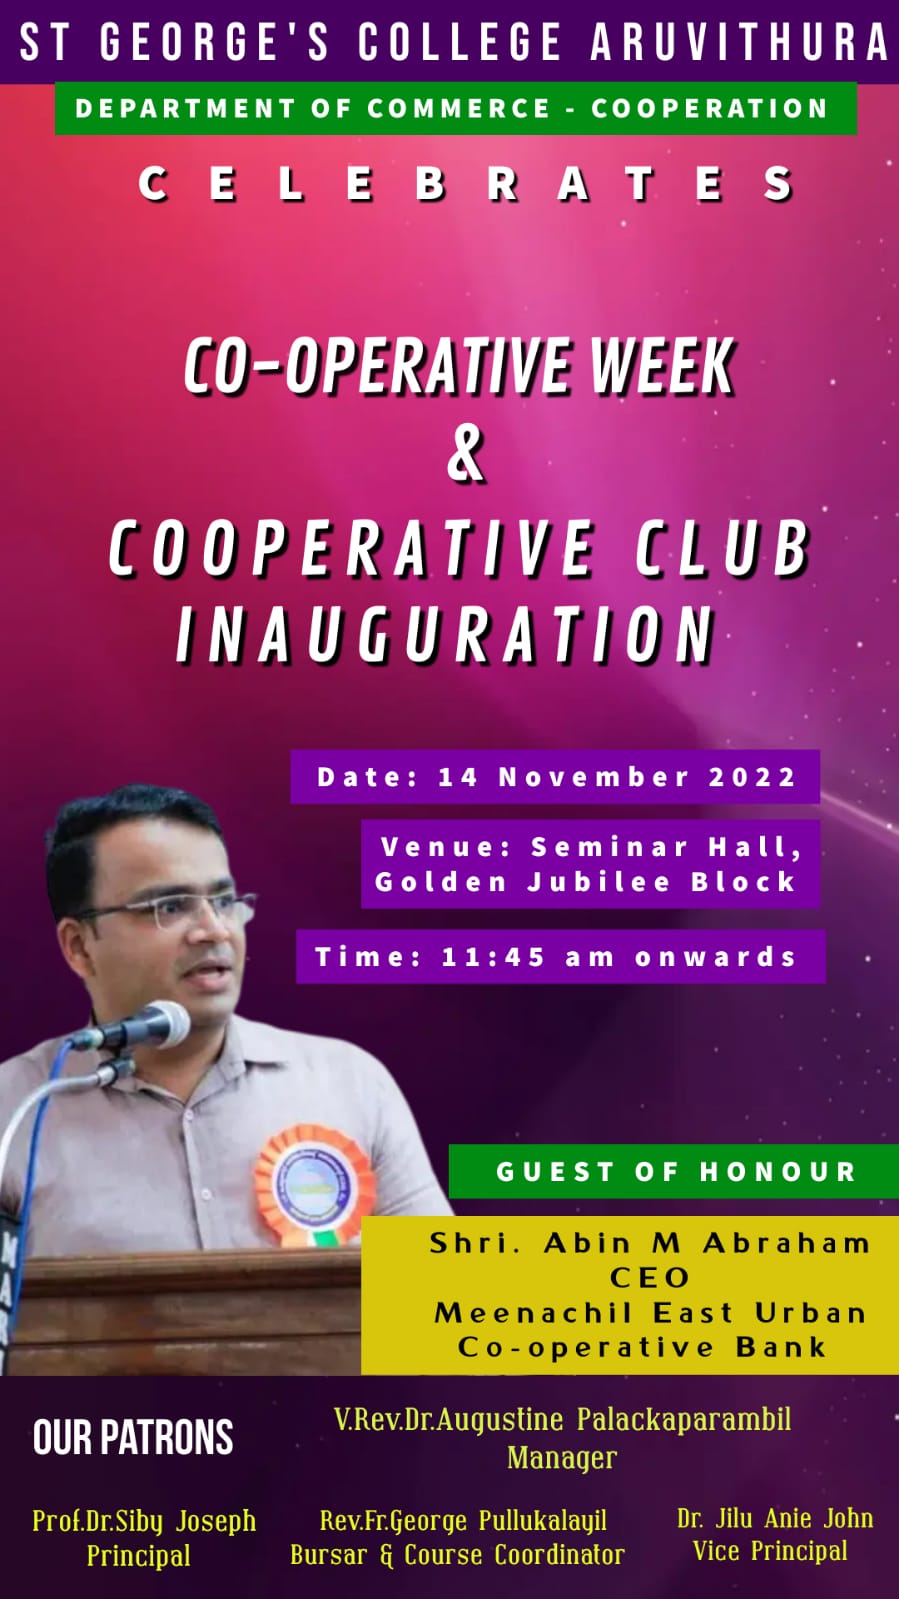 Co-operative Week & Co-operative Club Inauguration - Department of Commerce (Co-operation)